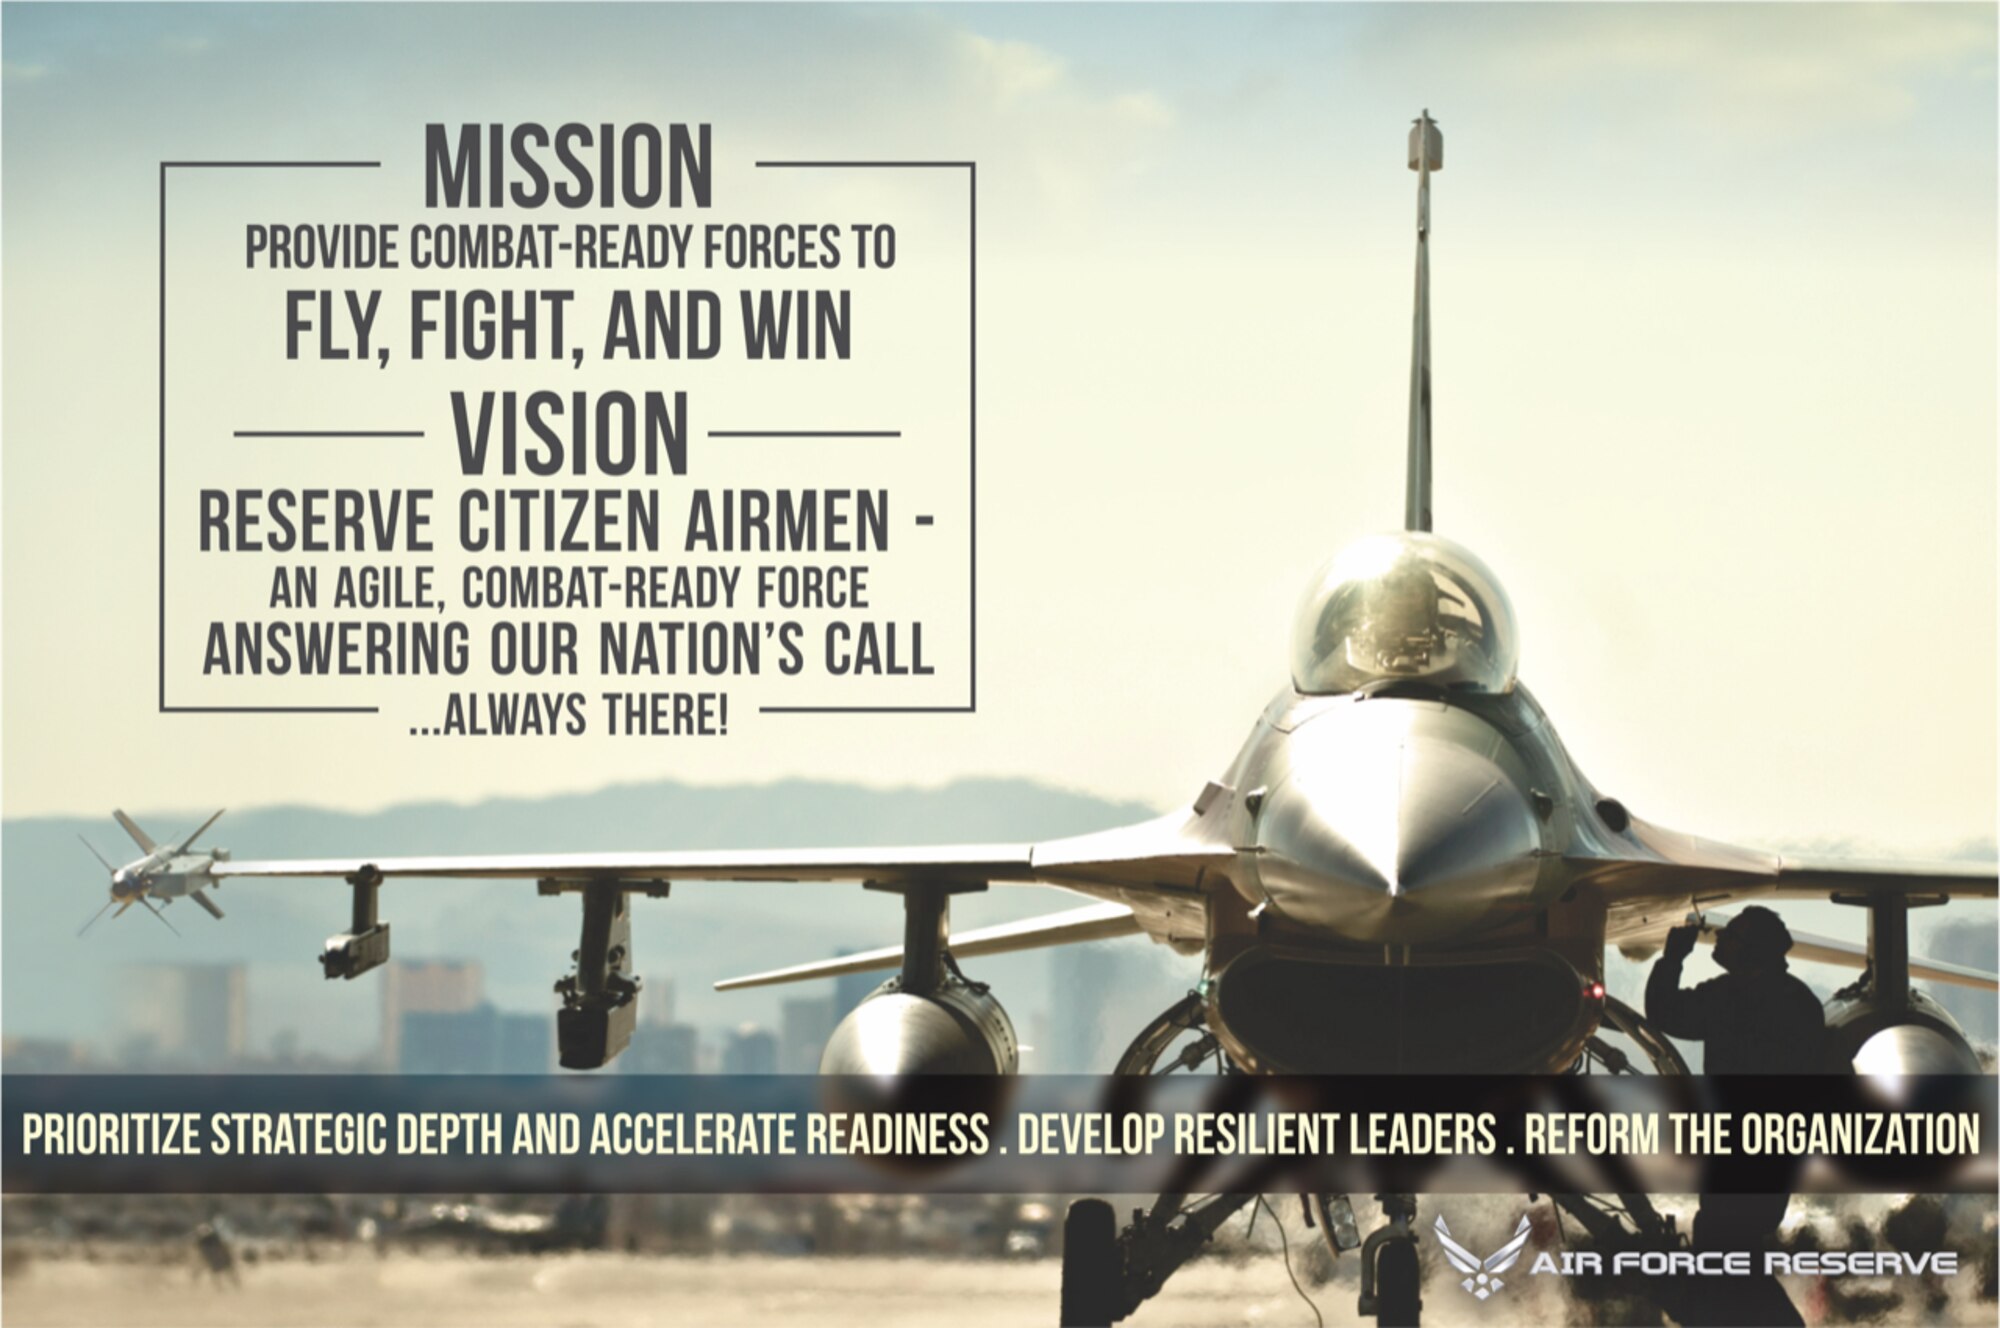 Air Force Reserve mission, vision statement